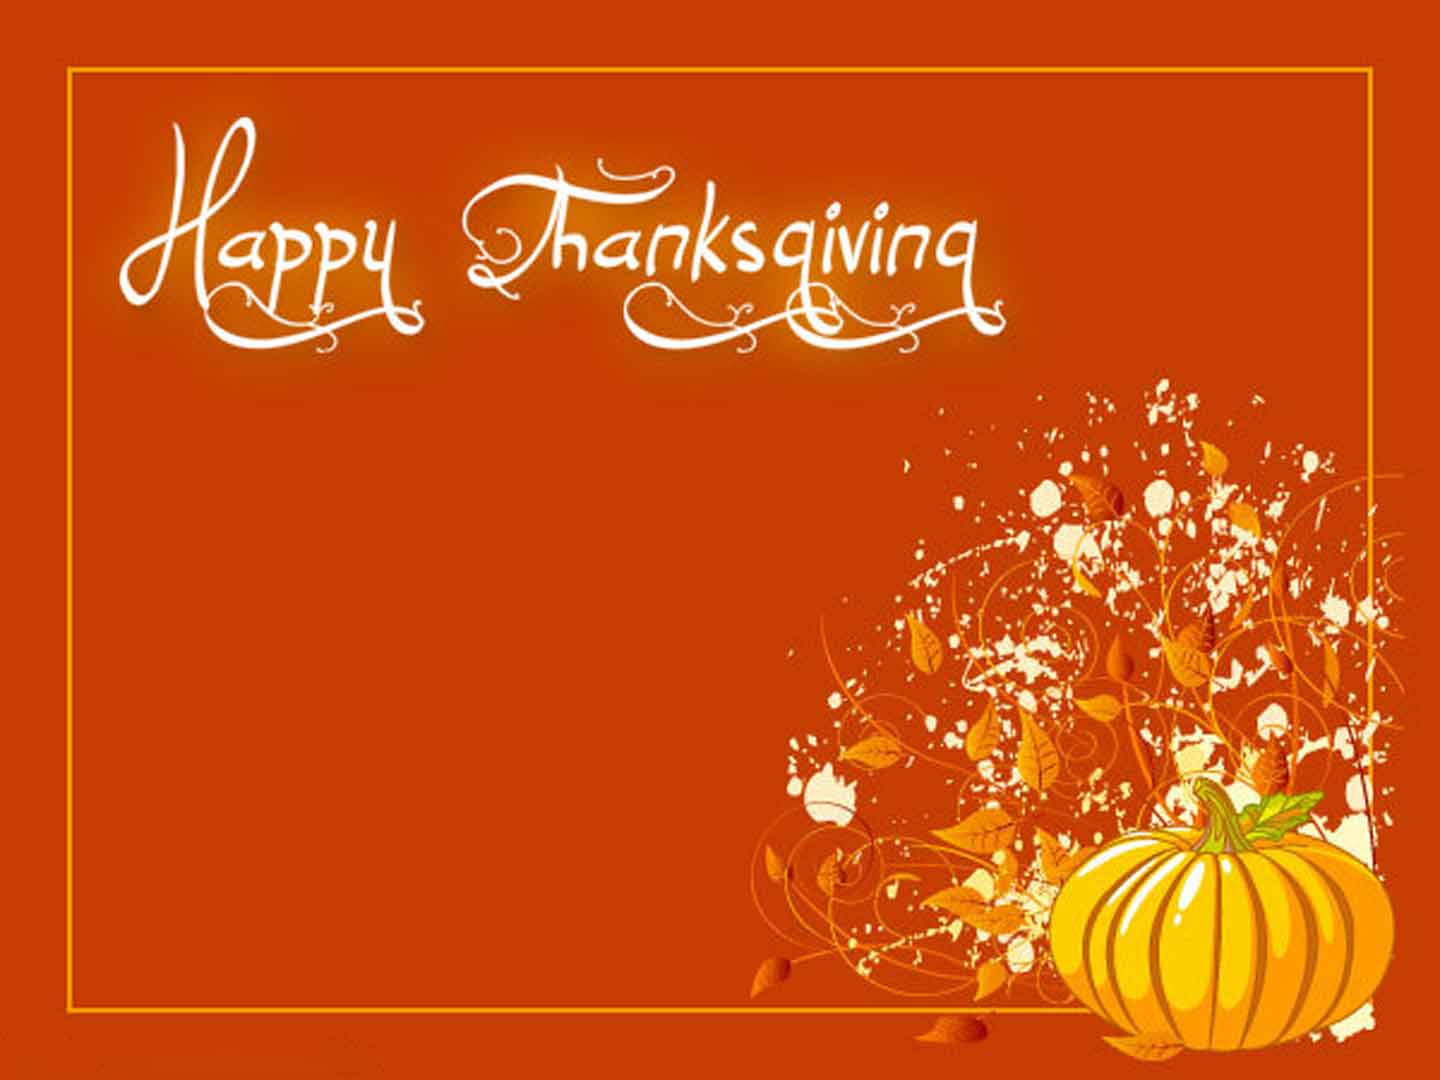 Wallpaper For > Happy Thanksgiving Background Image